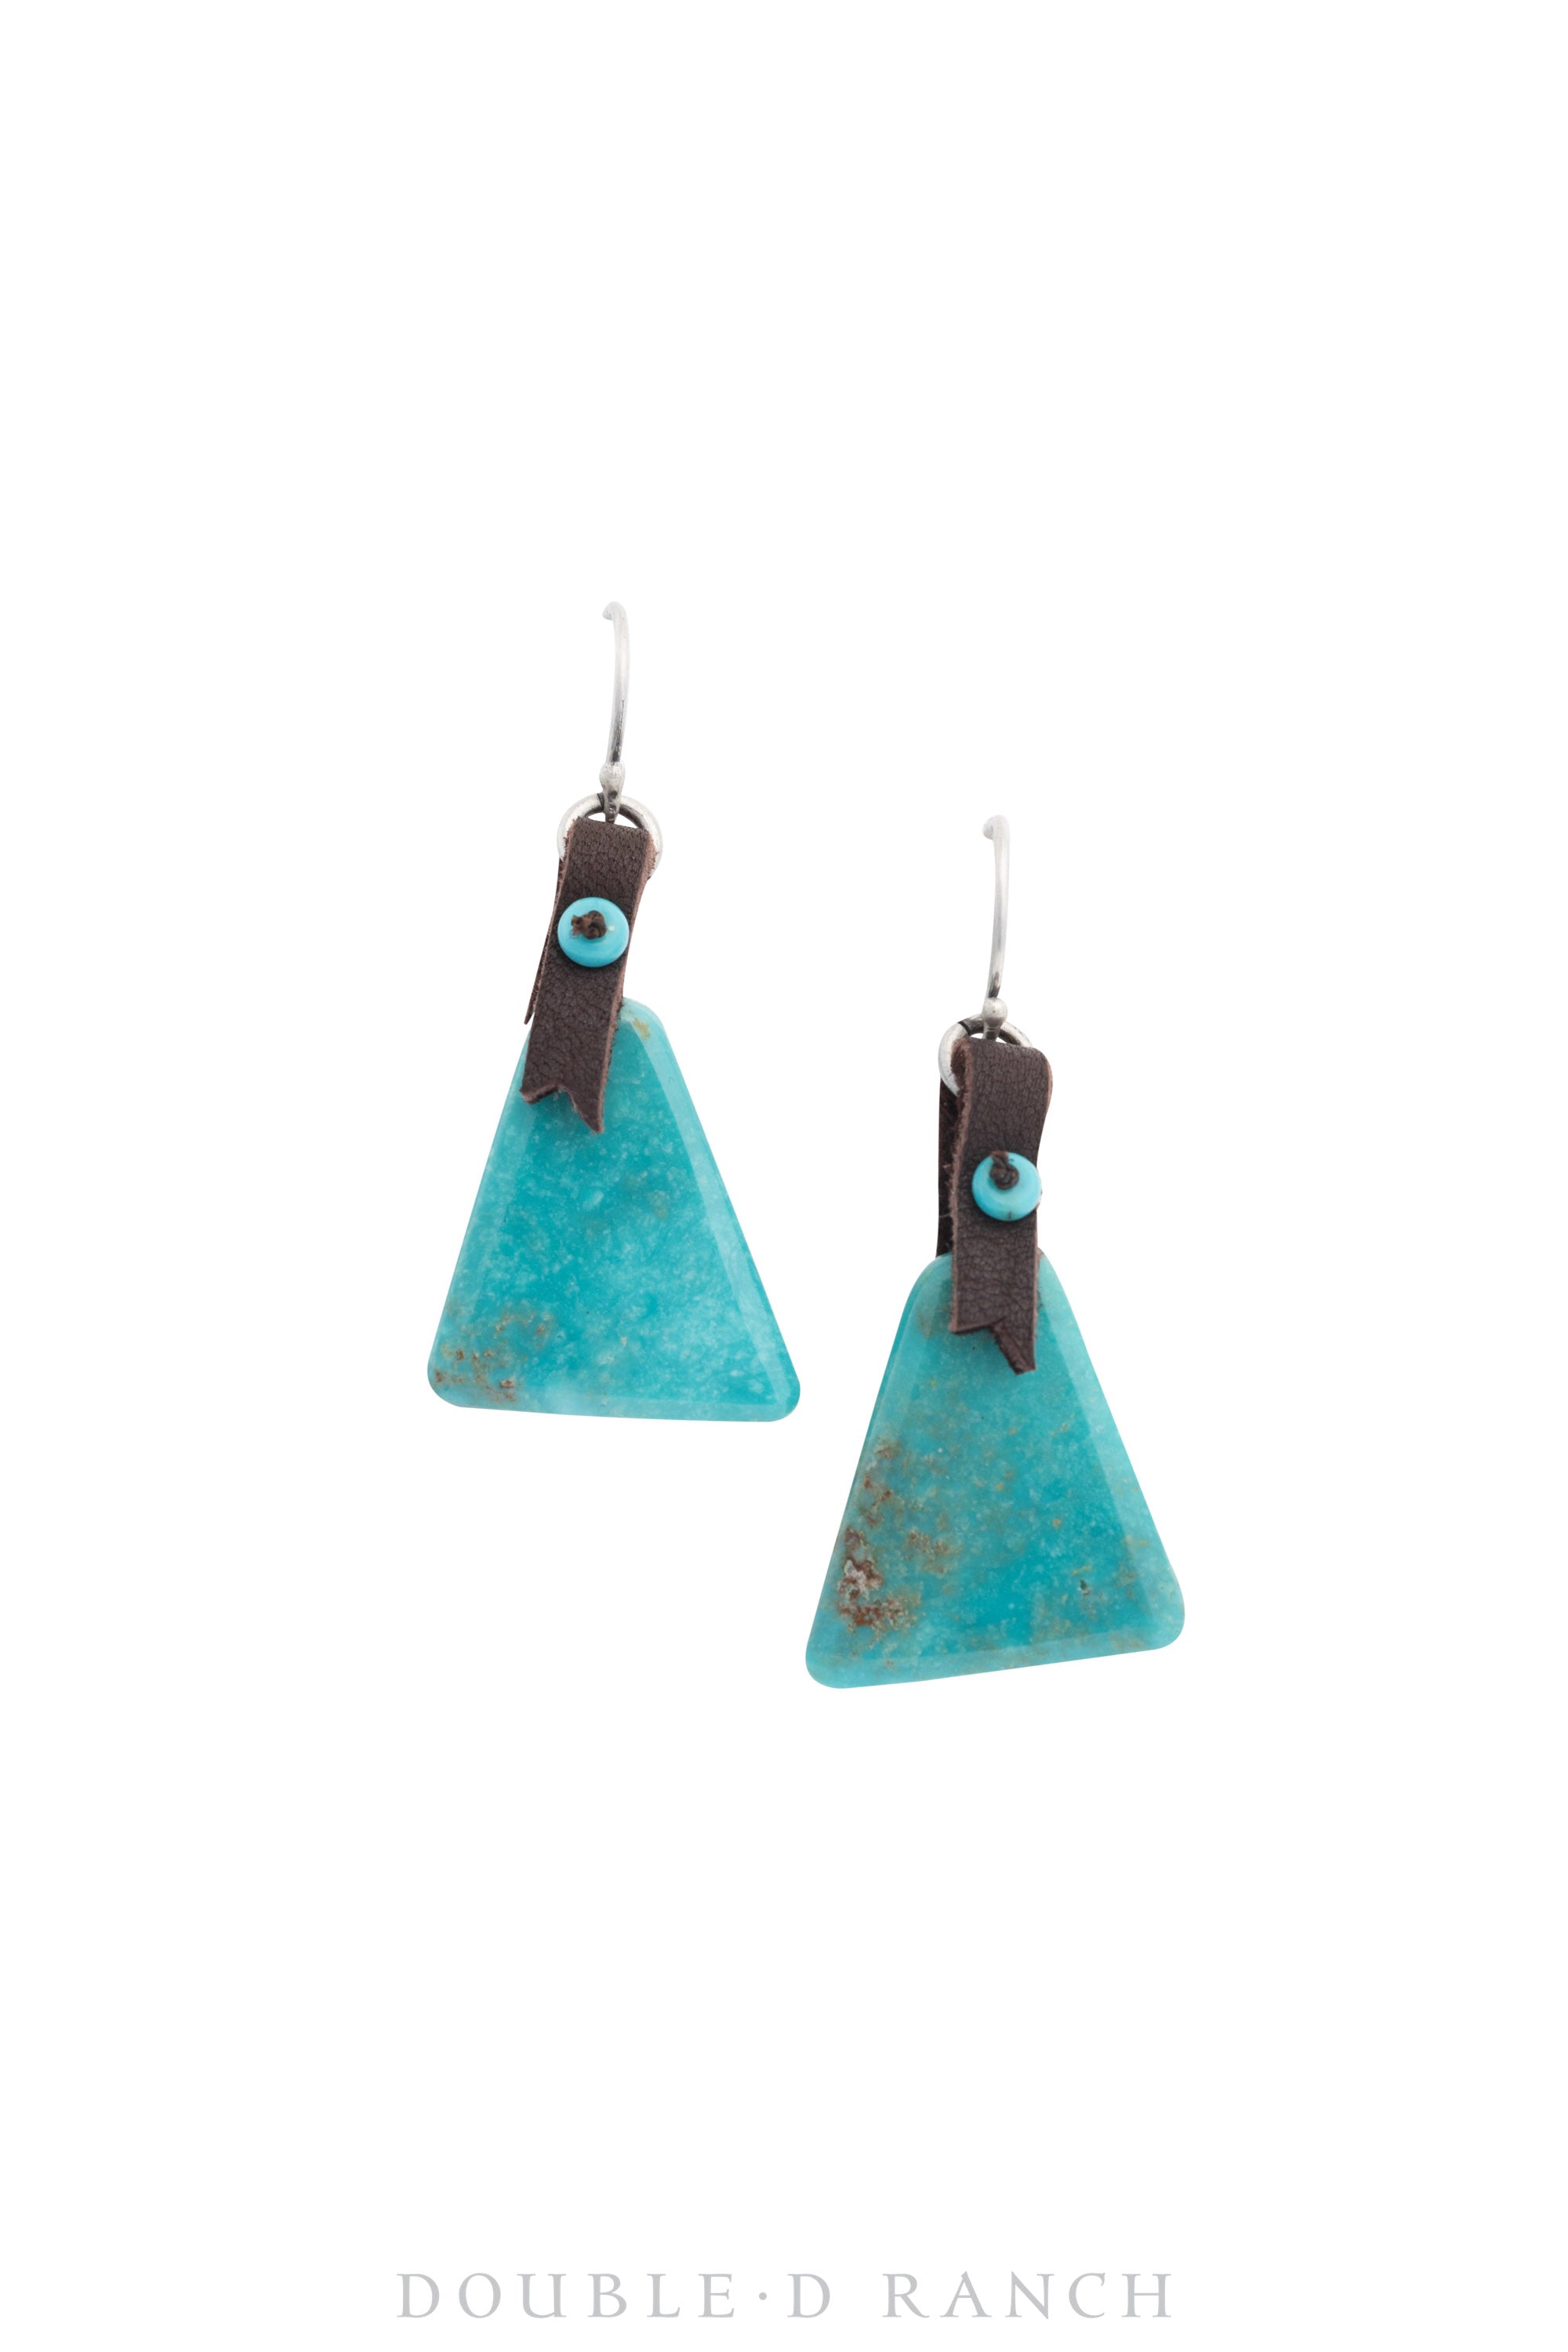 Earrings, Slab, Turquoise, Contemporary, 1482